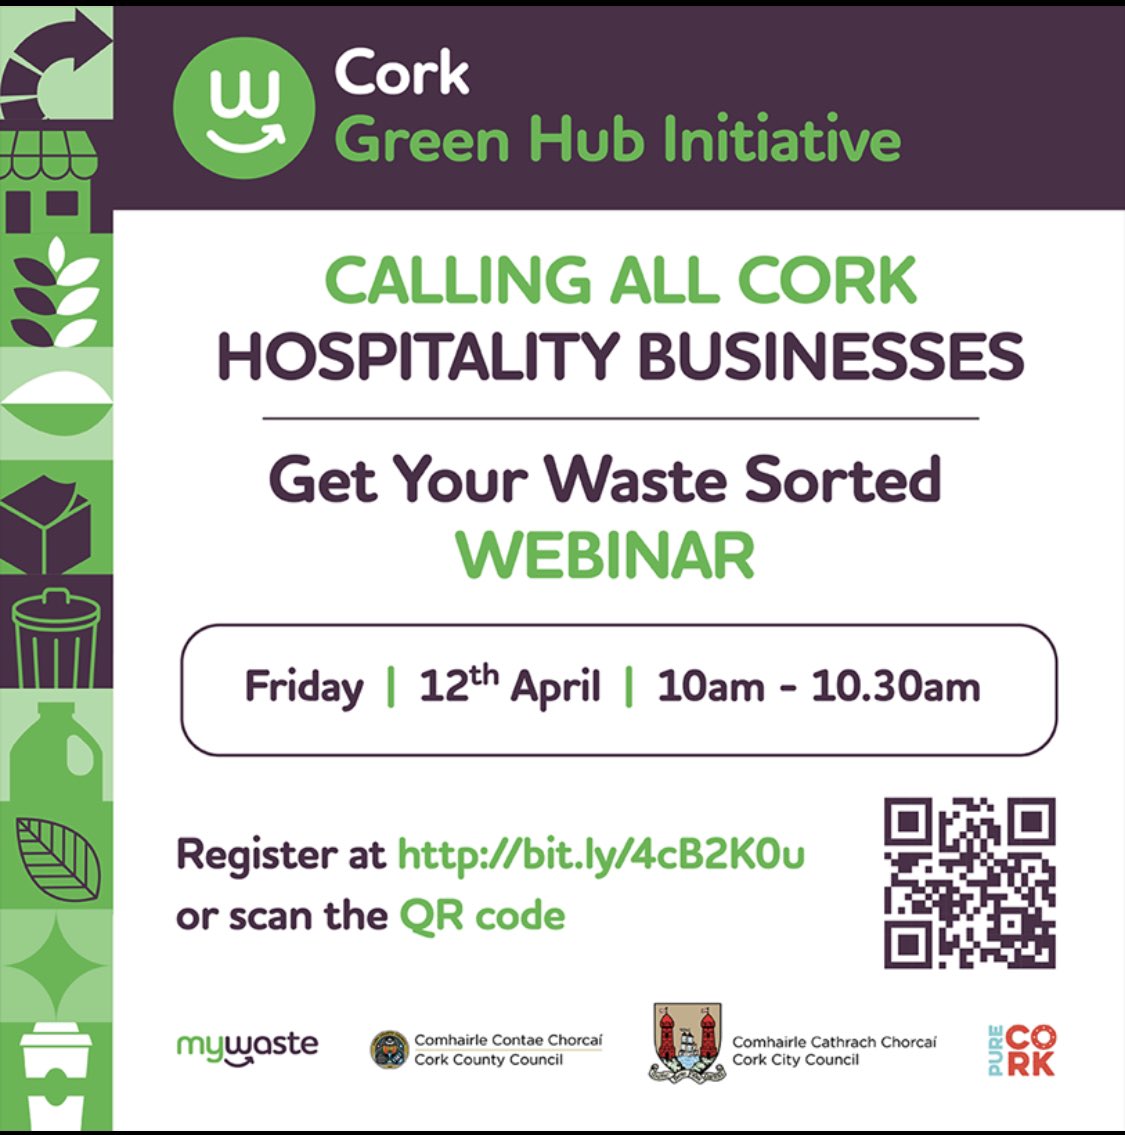 “Get Your Waste Sorted” Hospitality businesses- register for this Cork Green Hub Initiative webinar on Friday 12th April via the link or QR code below 👇🏻♻️✅